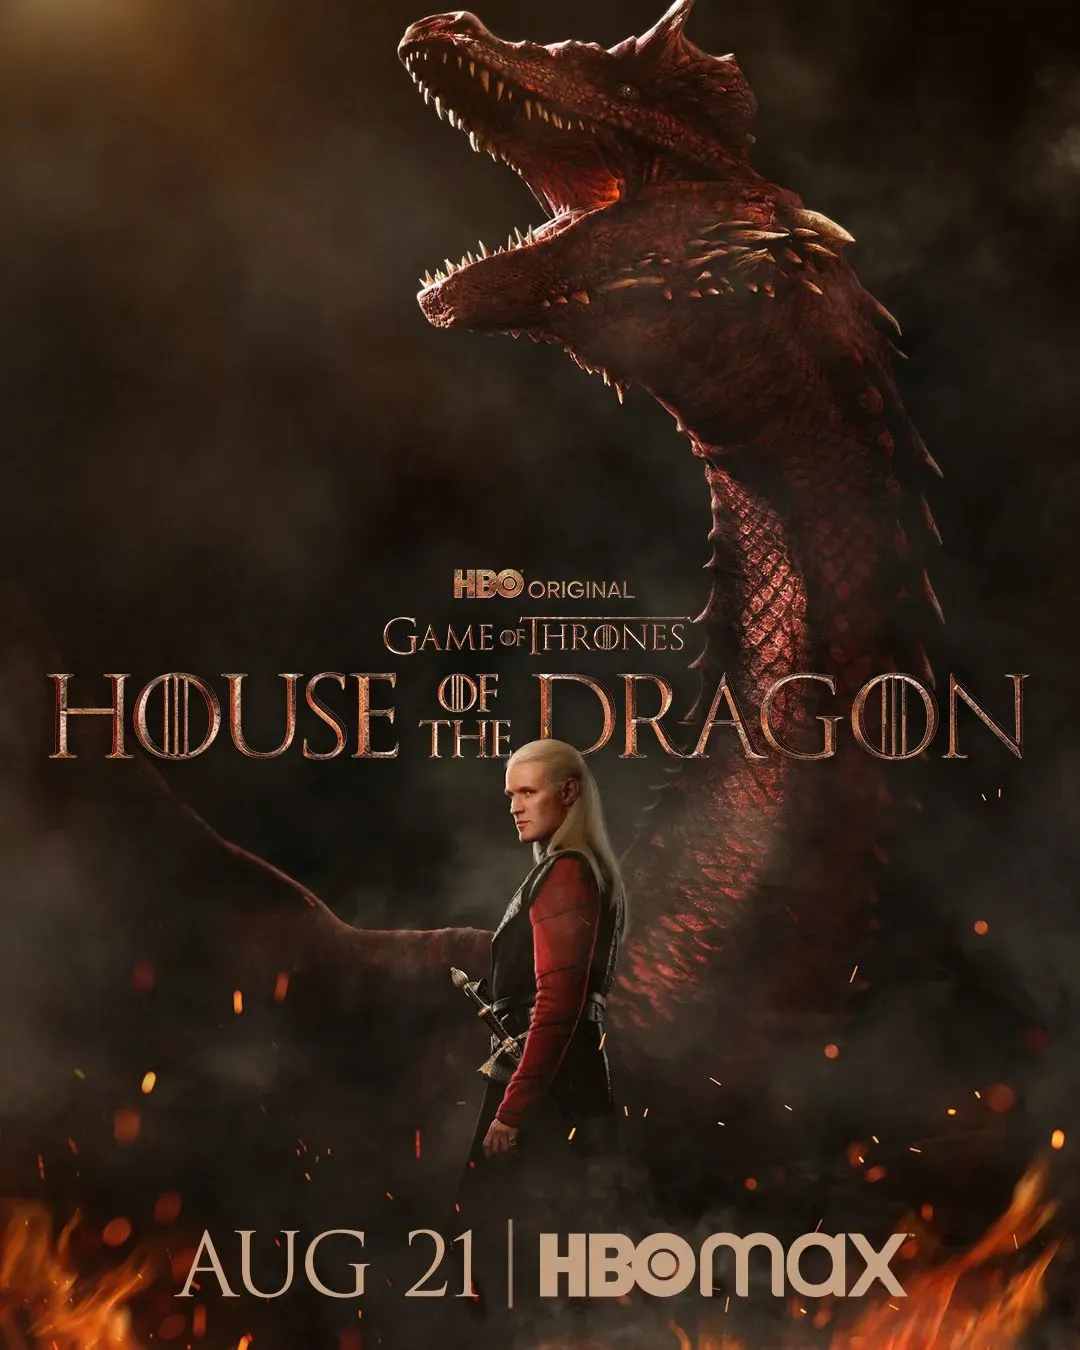 'House of the Dragon‎' releases new poster, airs on August 21 | FMV6